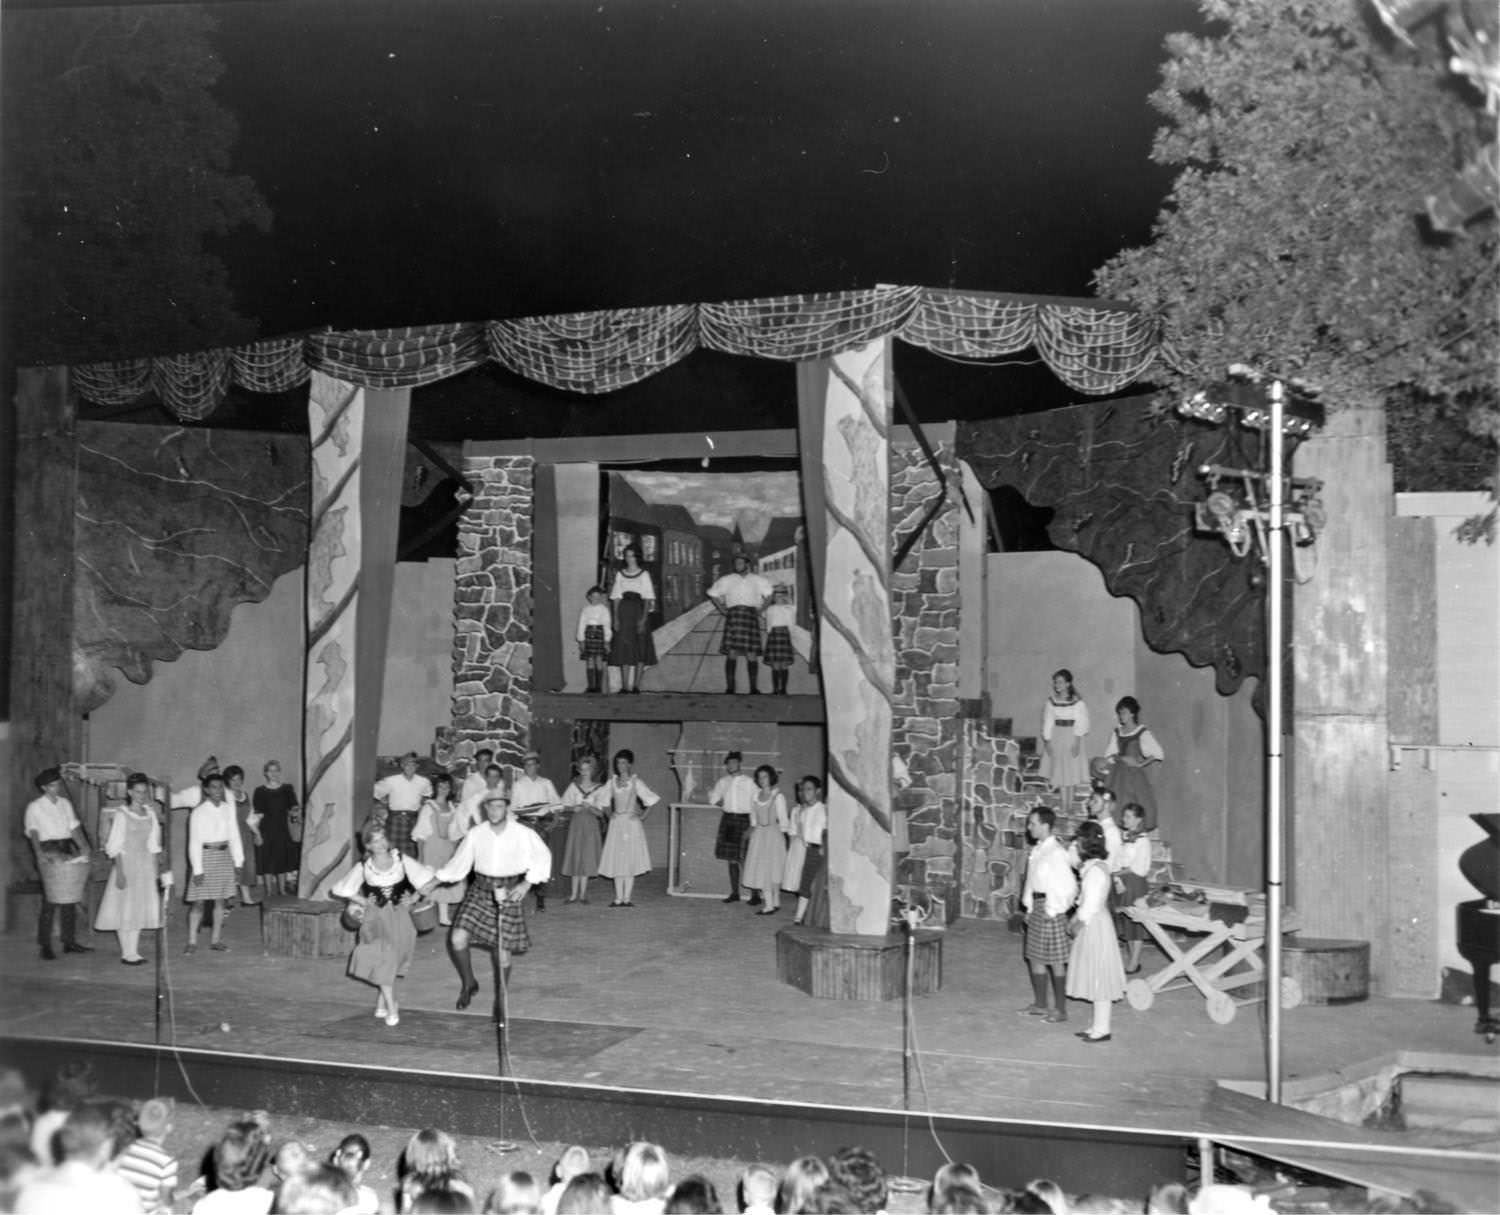 The cast of actors performing Brigadoon as the summer drama at the Zilker Hillside Theater in Austin, 1964